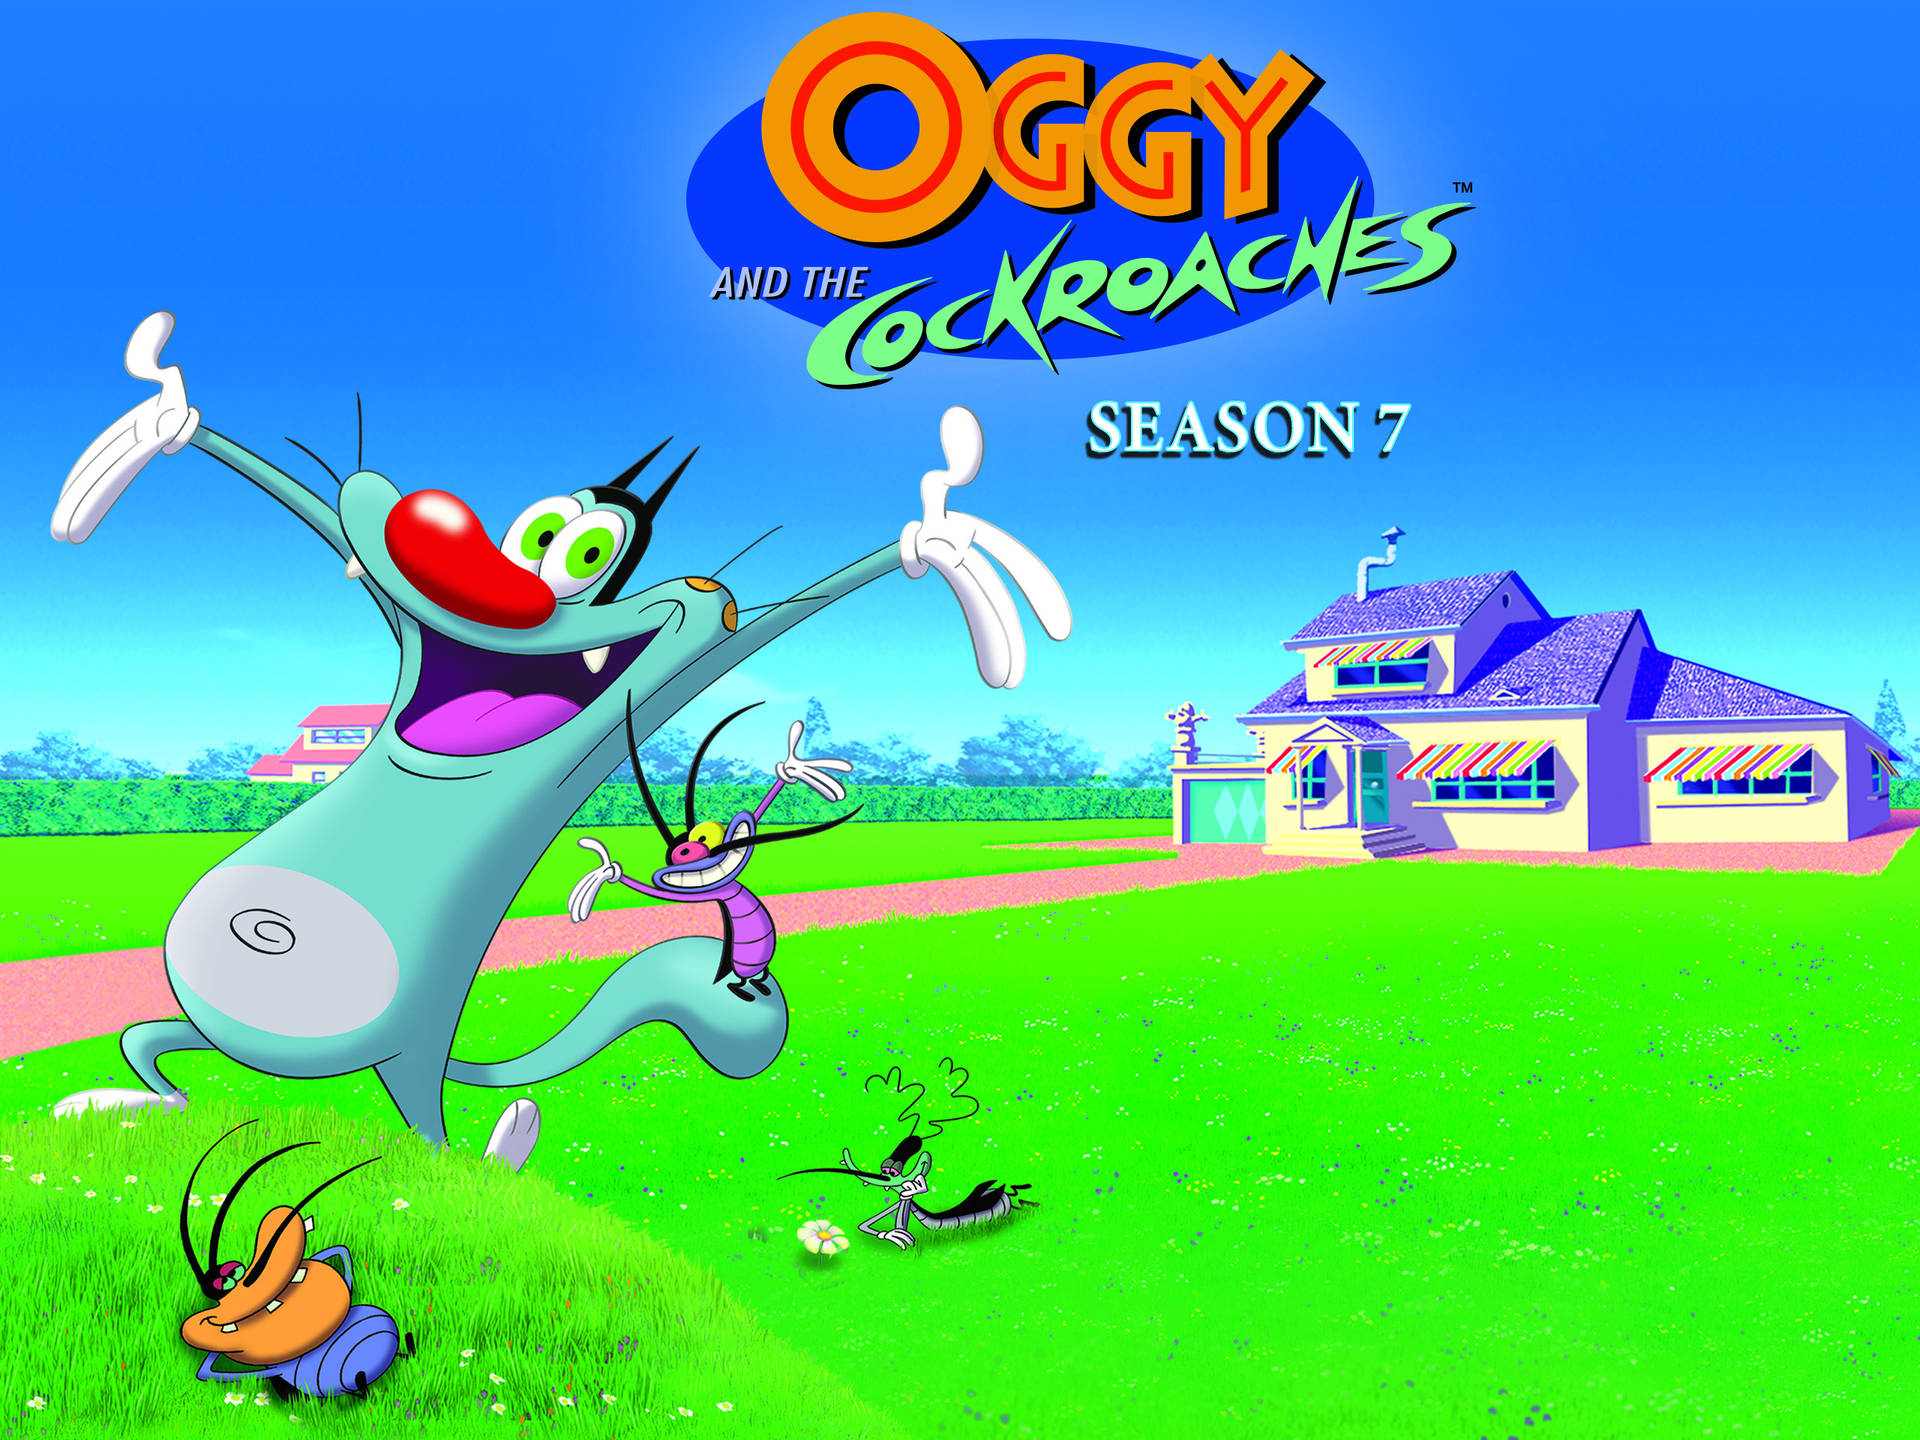 Oggy And The Cockroaches Season 7 Background